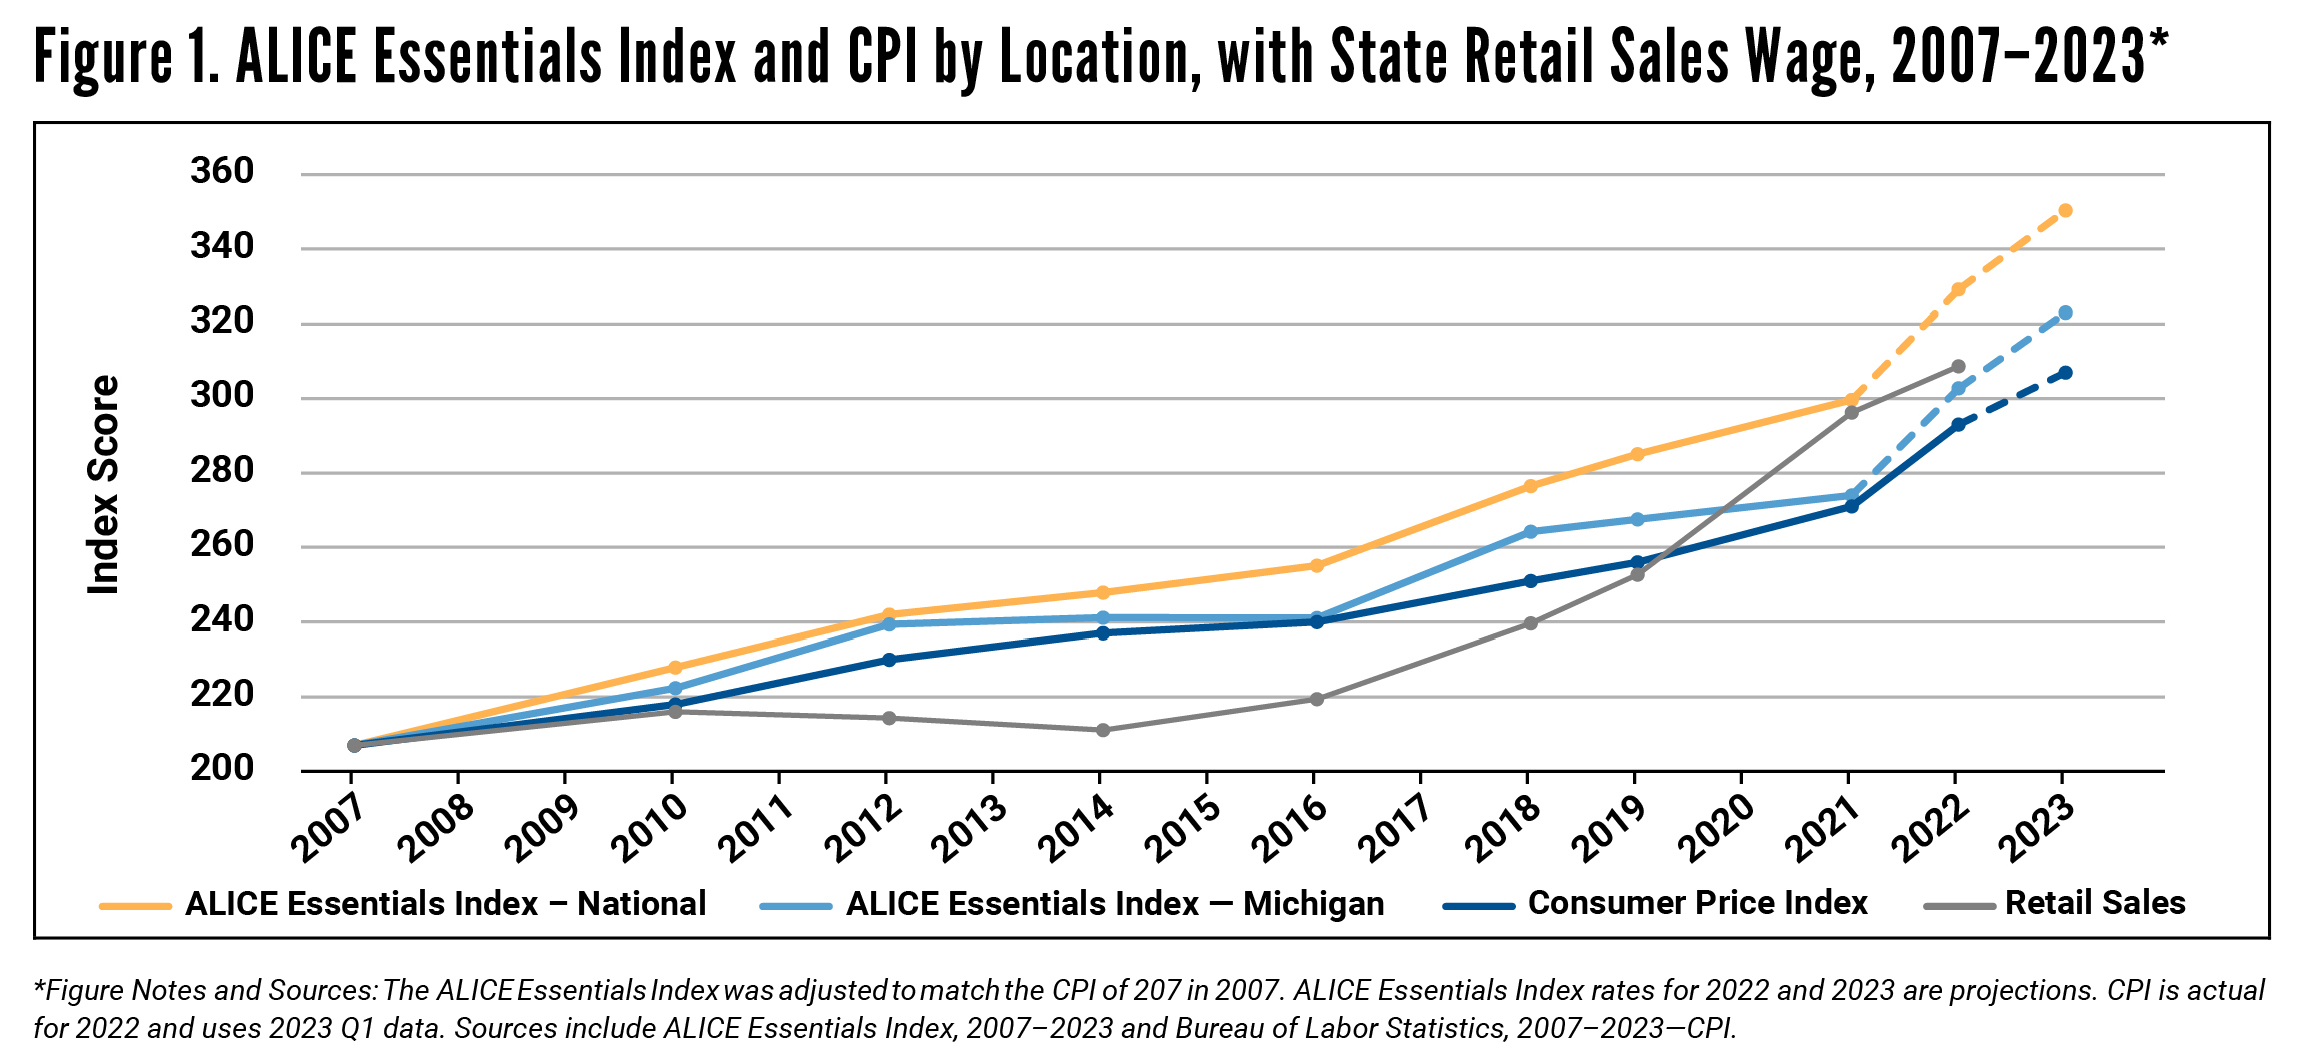 Figure 1 ALICE Essentials Index & CPI by Location with State Retail Sales Wage